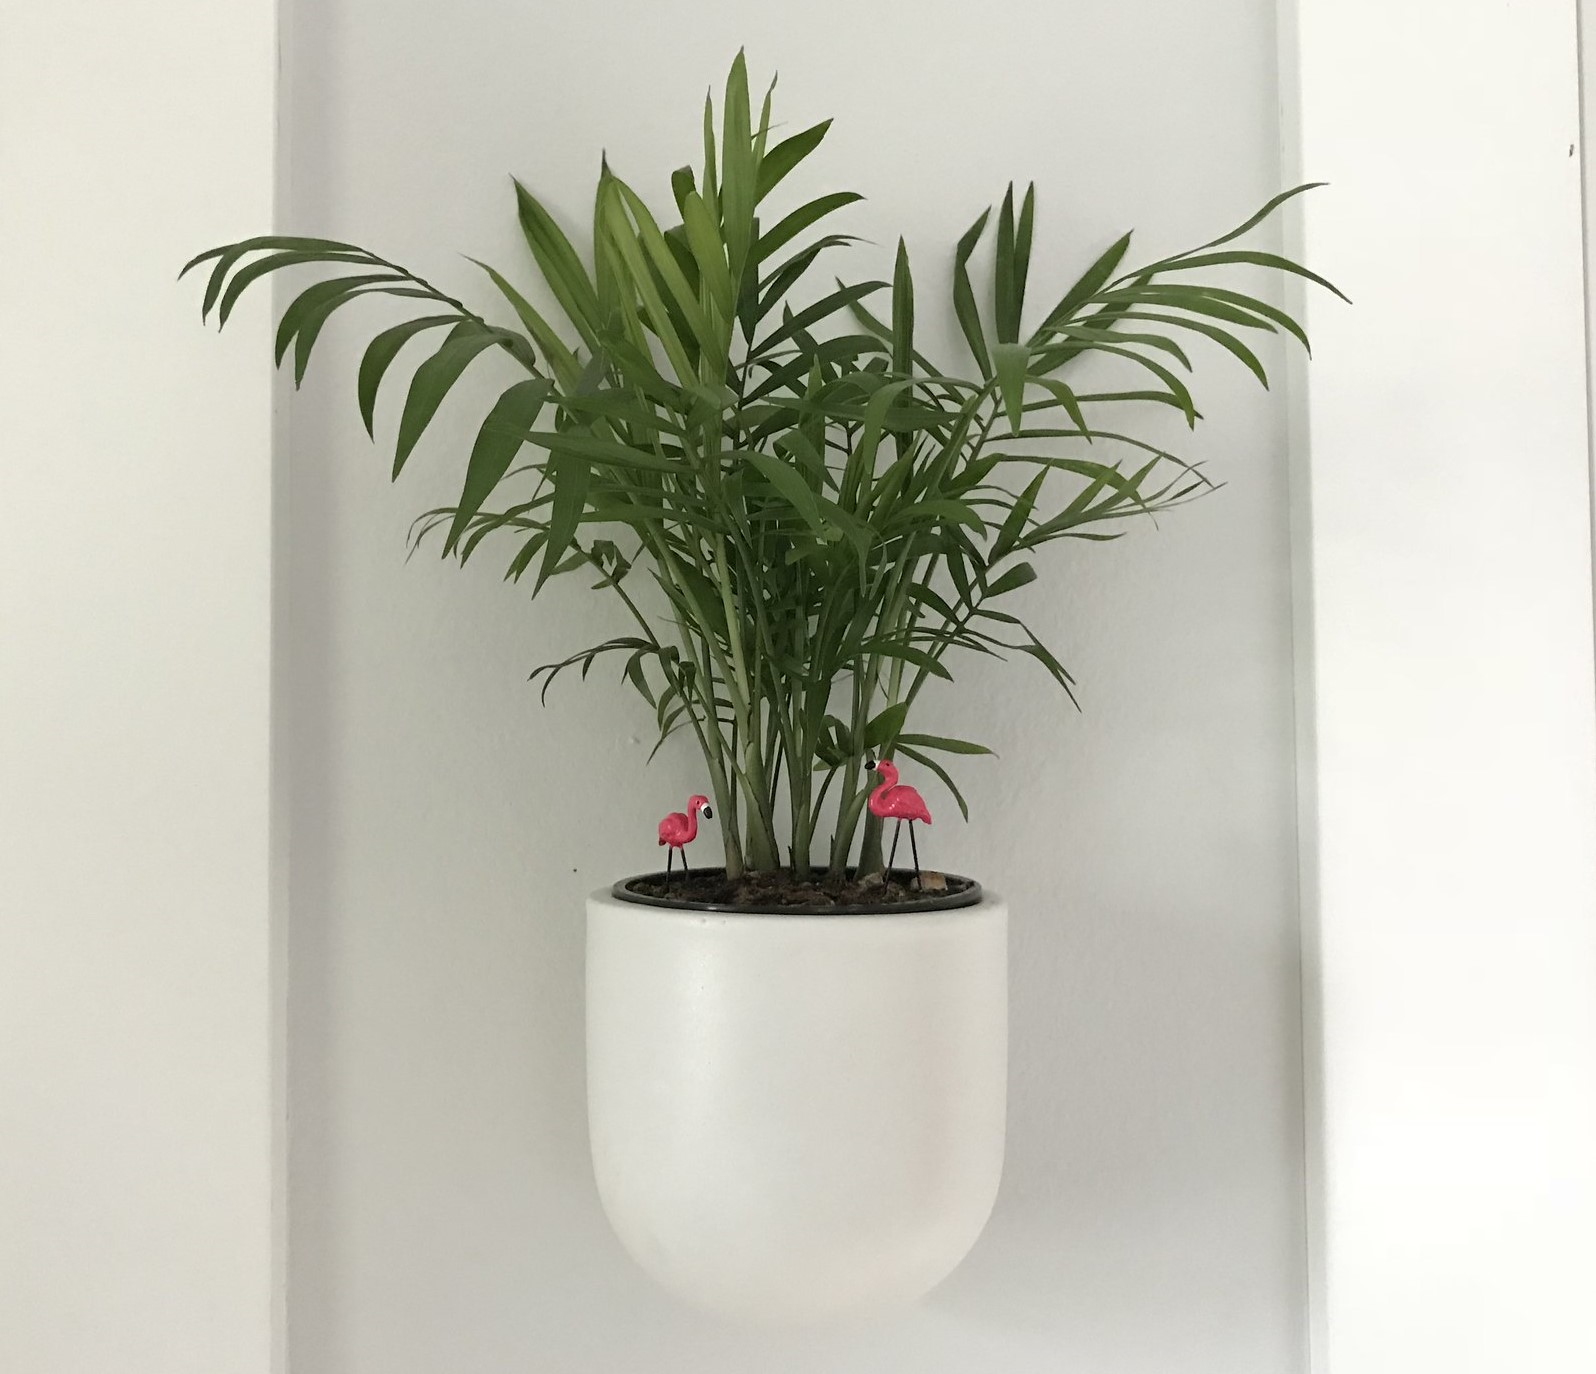 How to Grow Parlor Palm